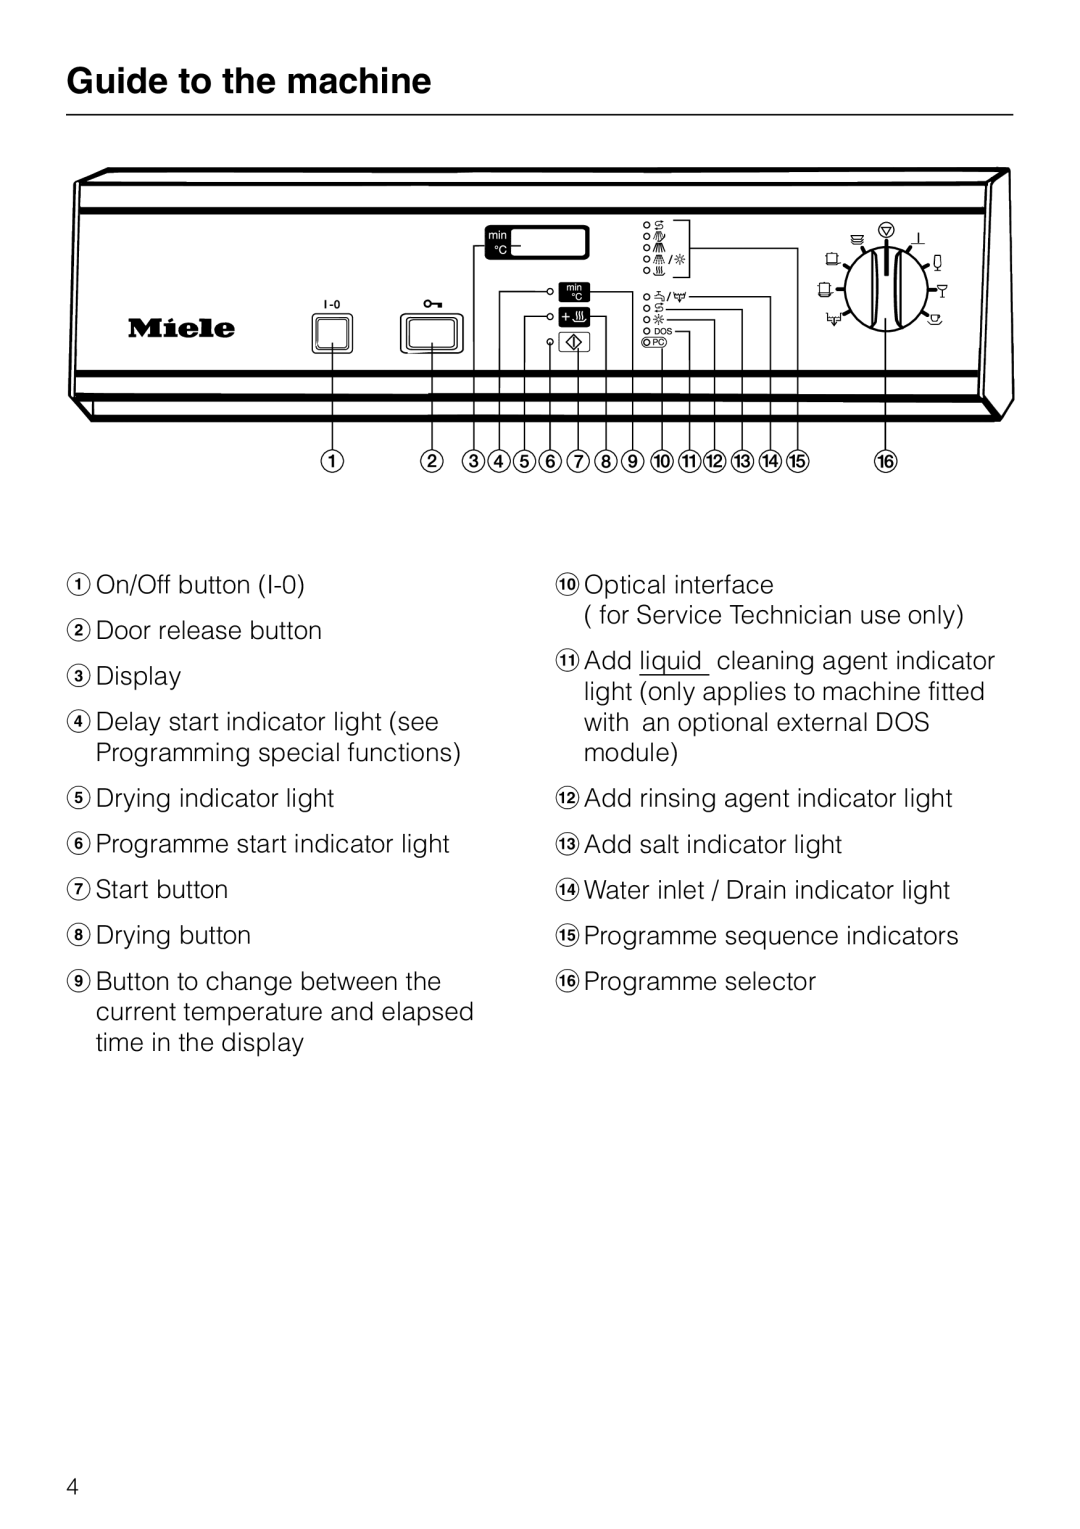 Miele G 7855 manual Guide to the machine 